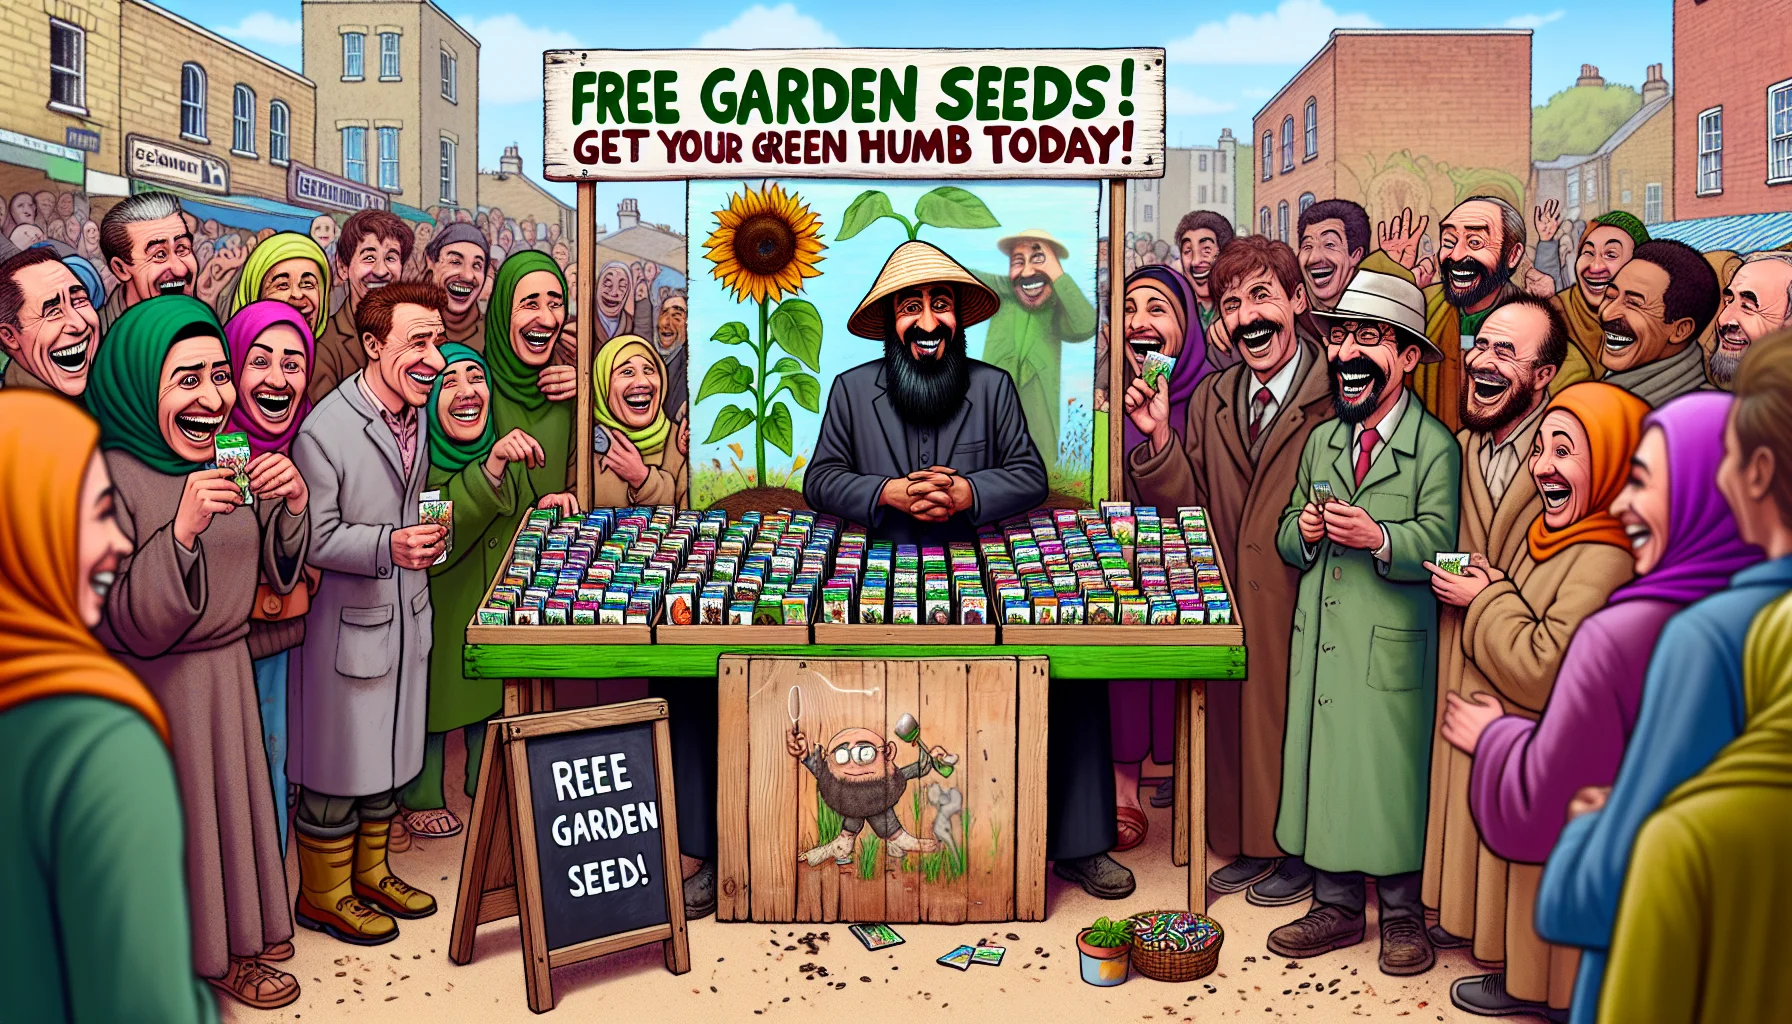 Imagine a humorous scene set in an open-air market. Middle-Eastern gardener is standing behind a colorful stall filled with packets of free garden seeds. He is wearing a sun hat and a warm smile. A wood sign hangs in the background displaying the words 'Free Garden Seeds! Get Your Green Thumb Today!' in bold, colourful letters. Around him, people of different descents and genders are laughing and enjoying themselves as they eagerly pick free seeds. A chalkboard propped up next to the stall displays a comic illustration of a sunflower with exaggerated facial expressions, reminding viewers gardening can be fun.